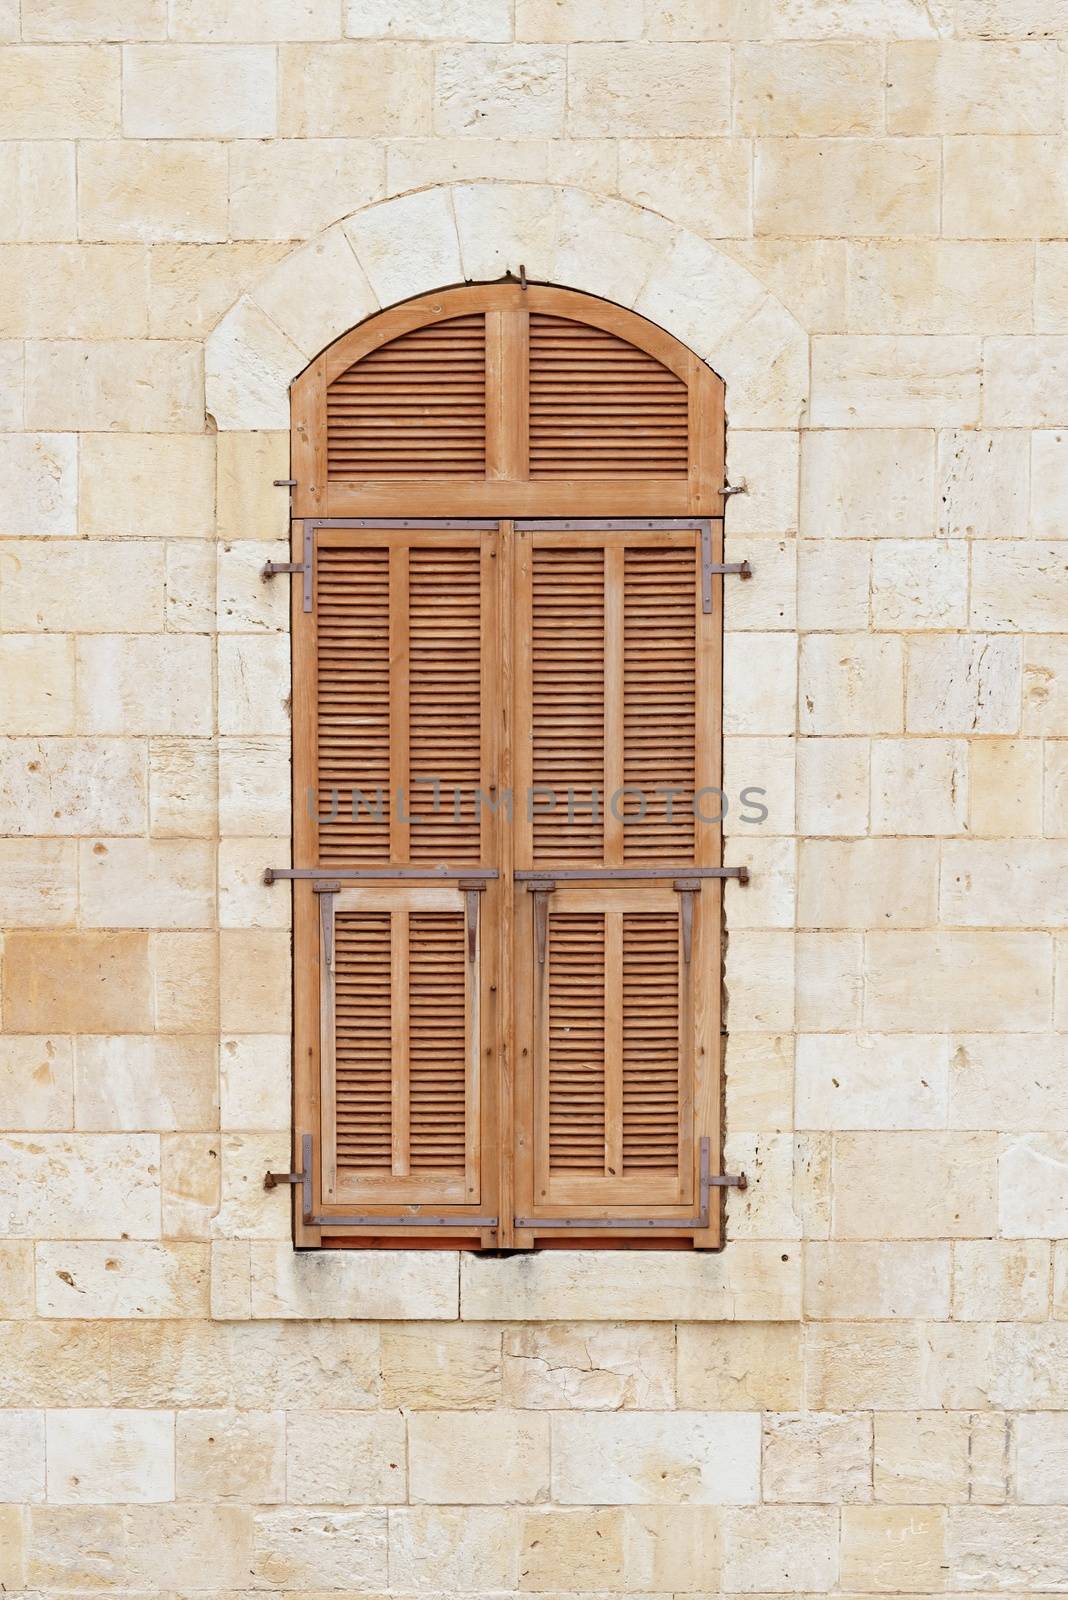 Closed window of the old building covered by wooden blinds